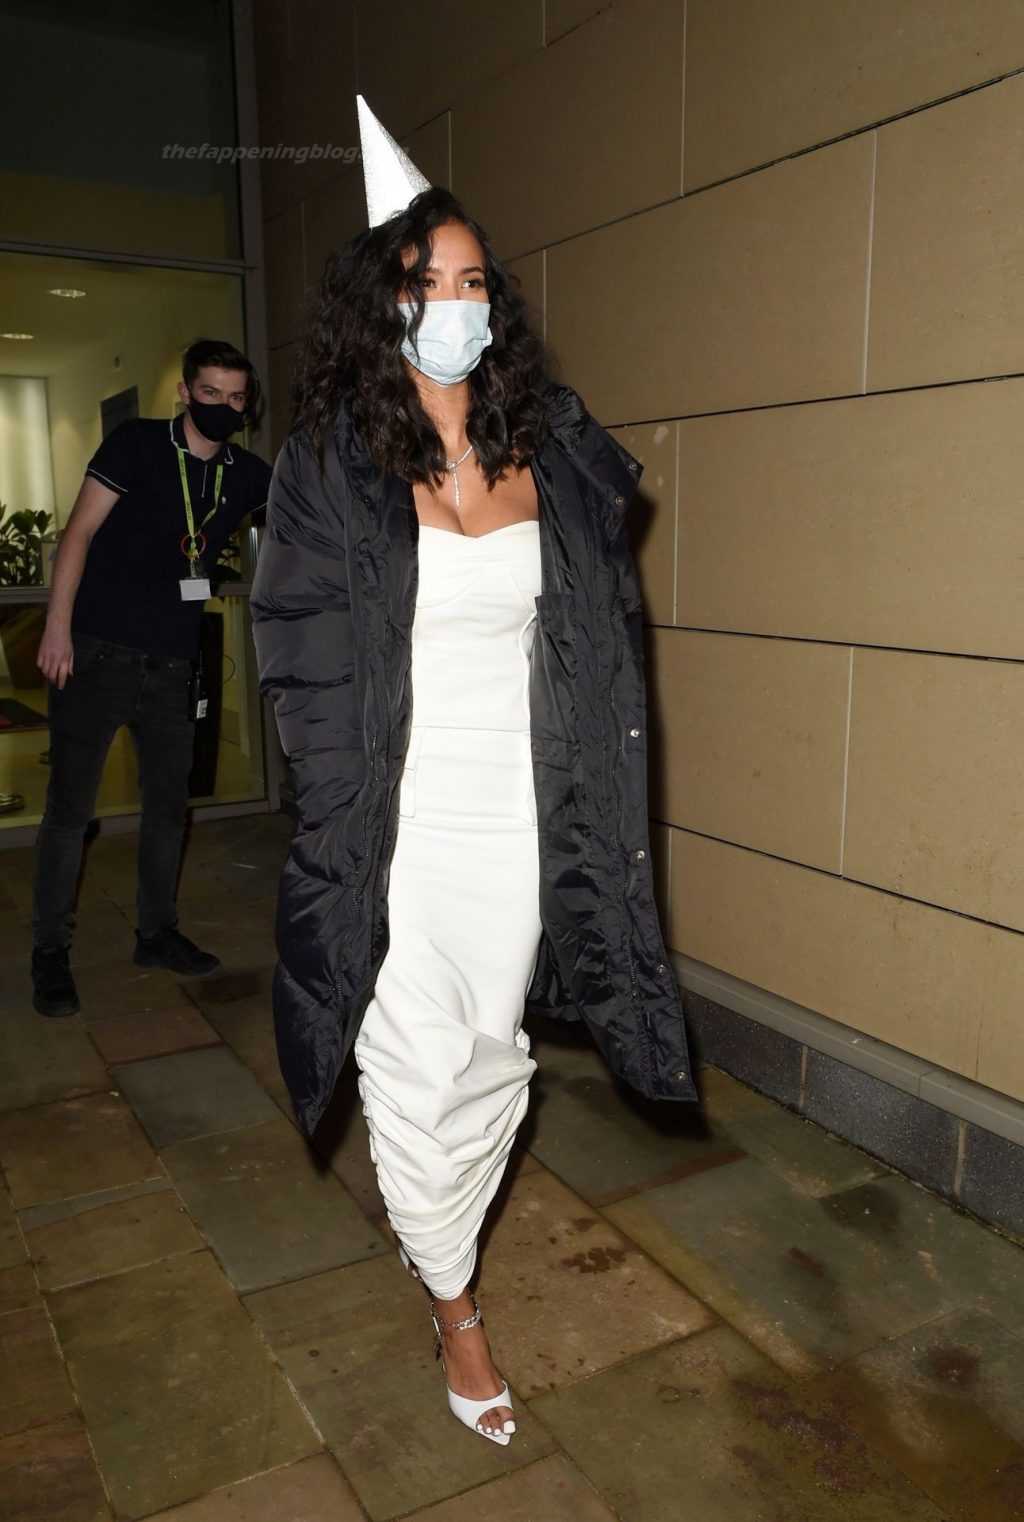 Maya Jama is Seen in a White Dress in Manchester (17 Photos)